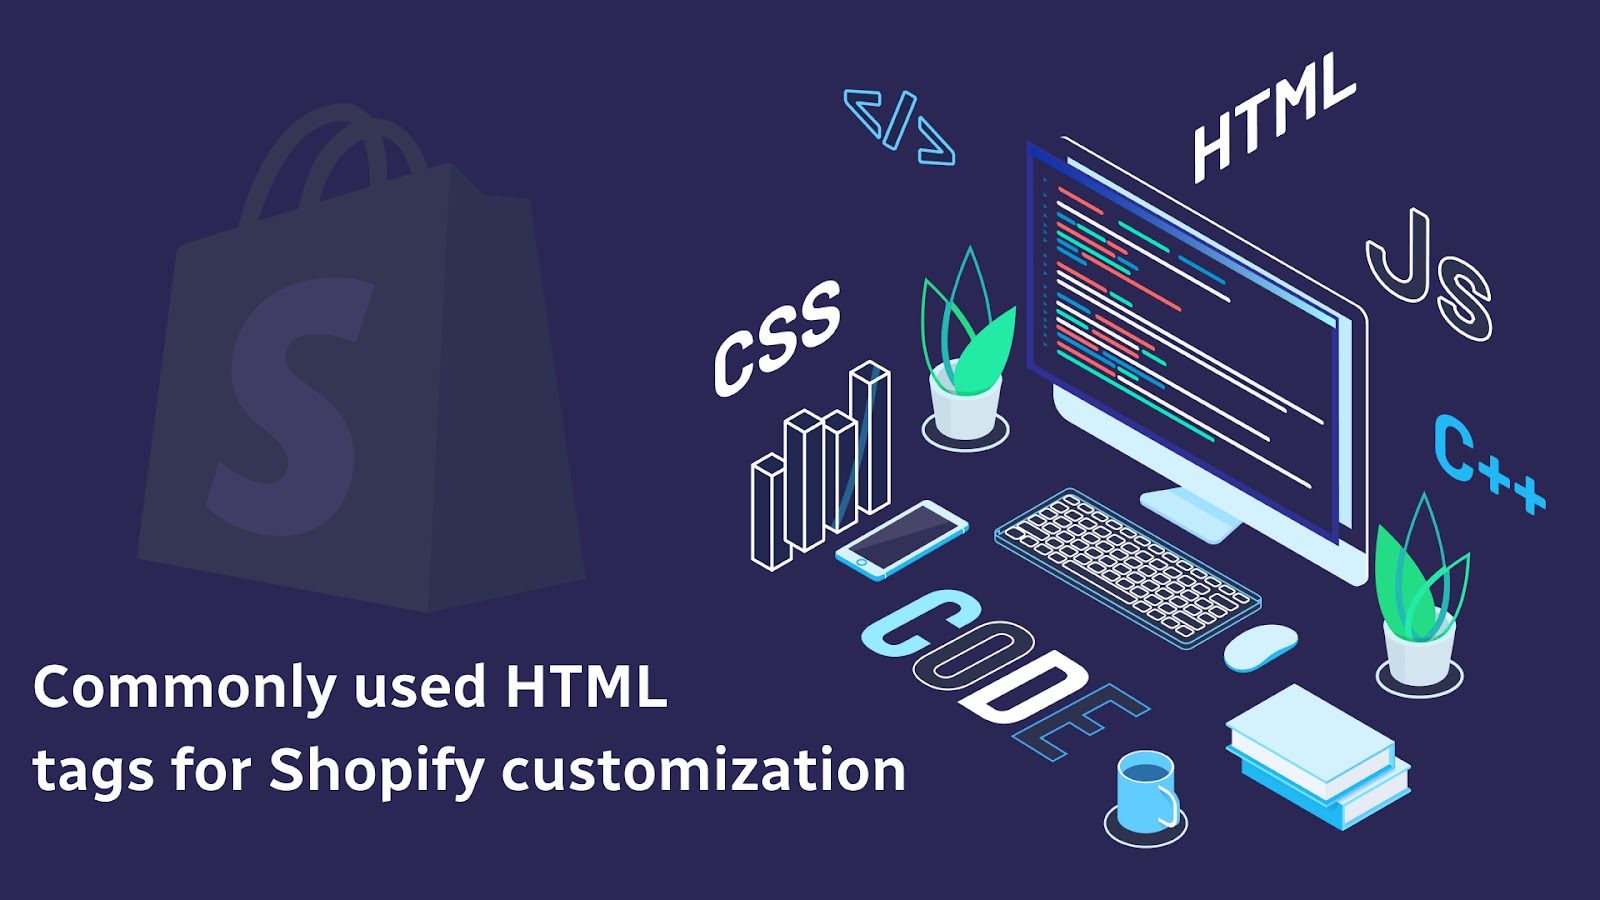 Commonly used HTML tags for Shopify customization